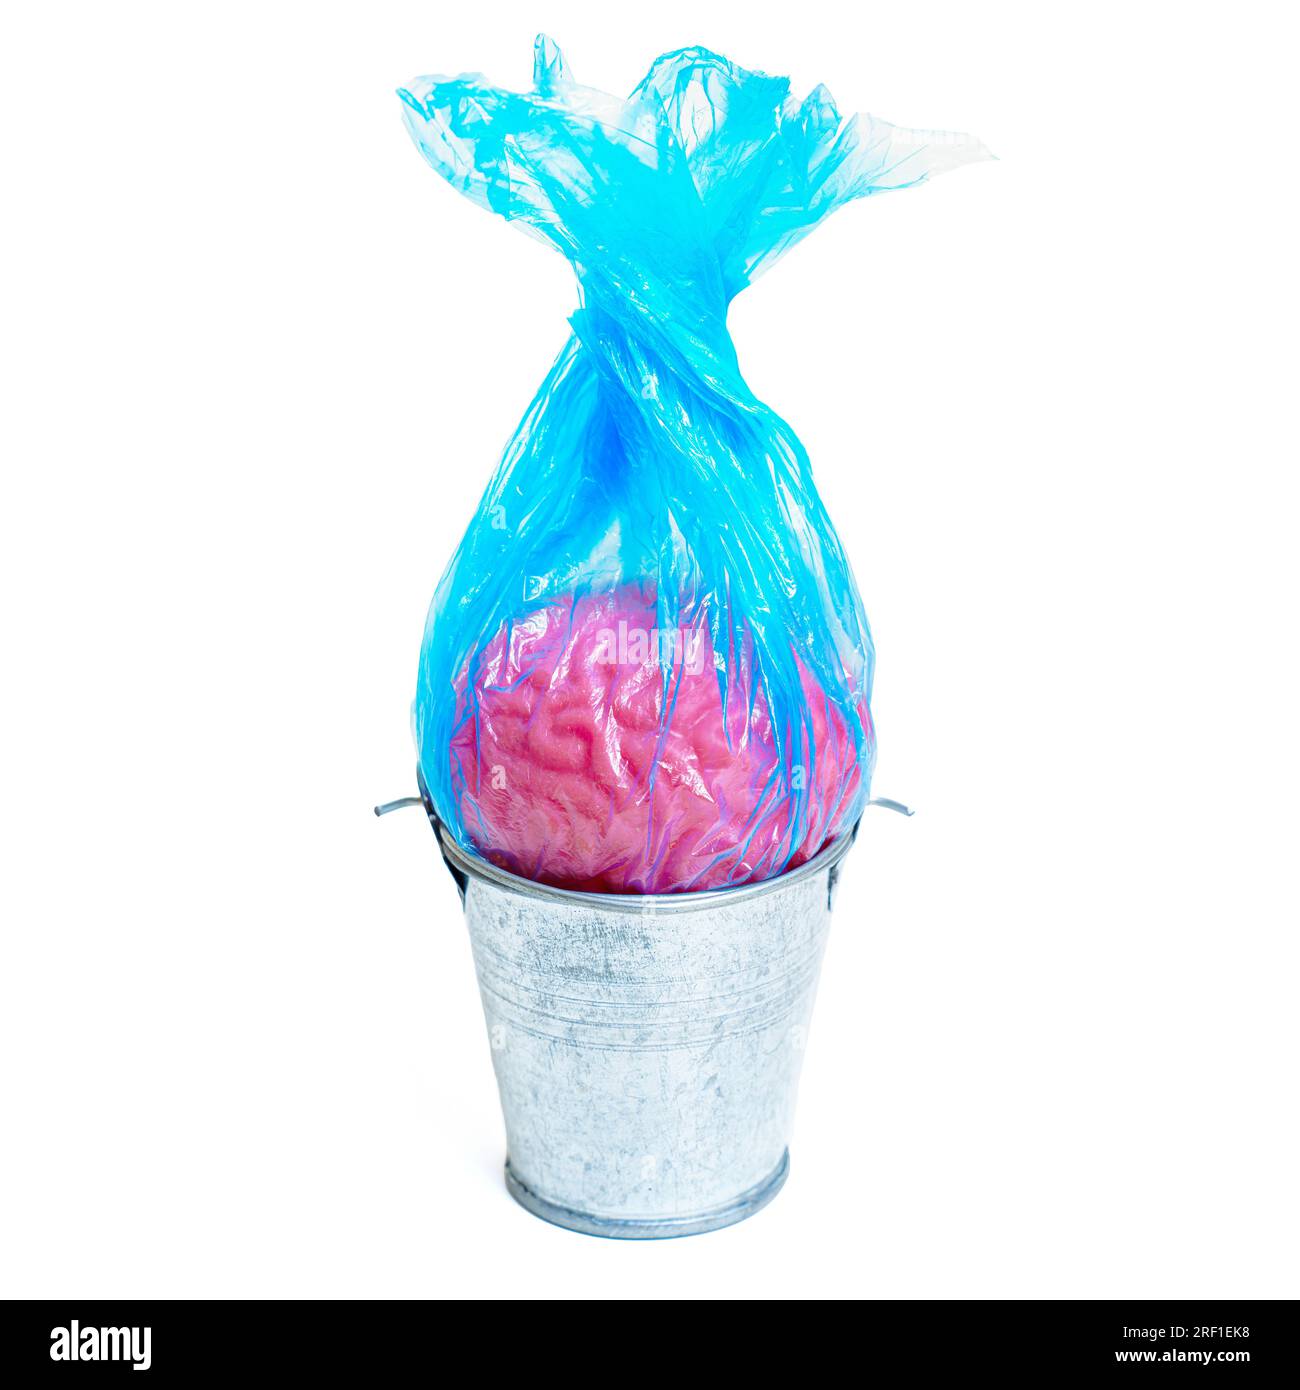 Close-up of a human brain wrapped in a blue trash bag and placed inside a waste bin isolated on white background. Creative mind decluttering concept. Stock Photo